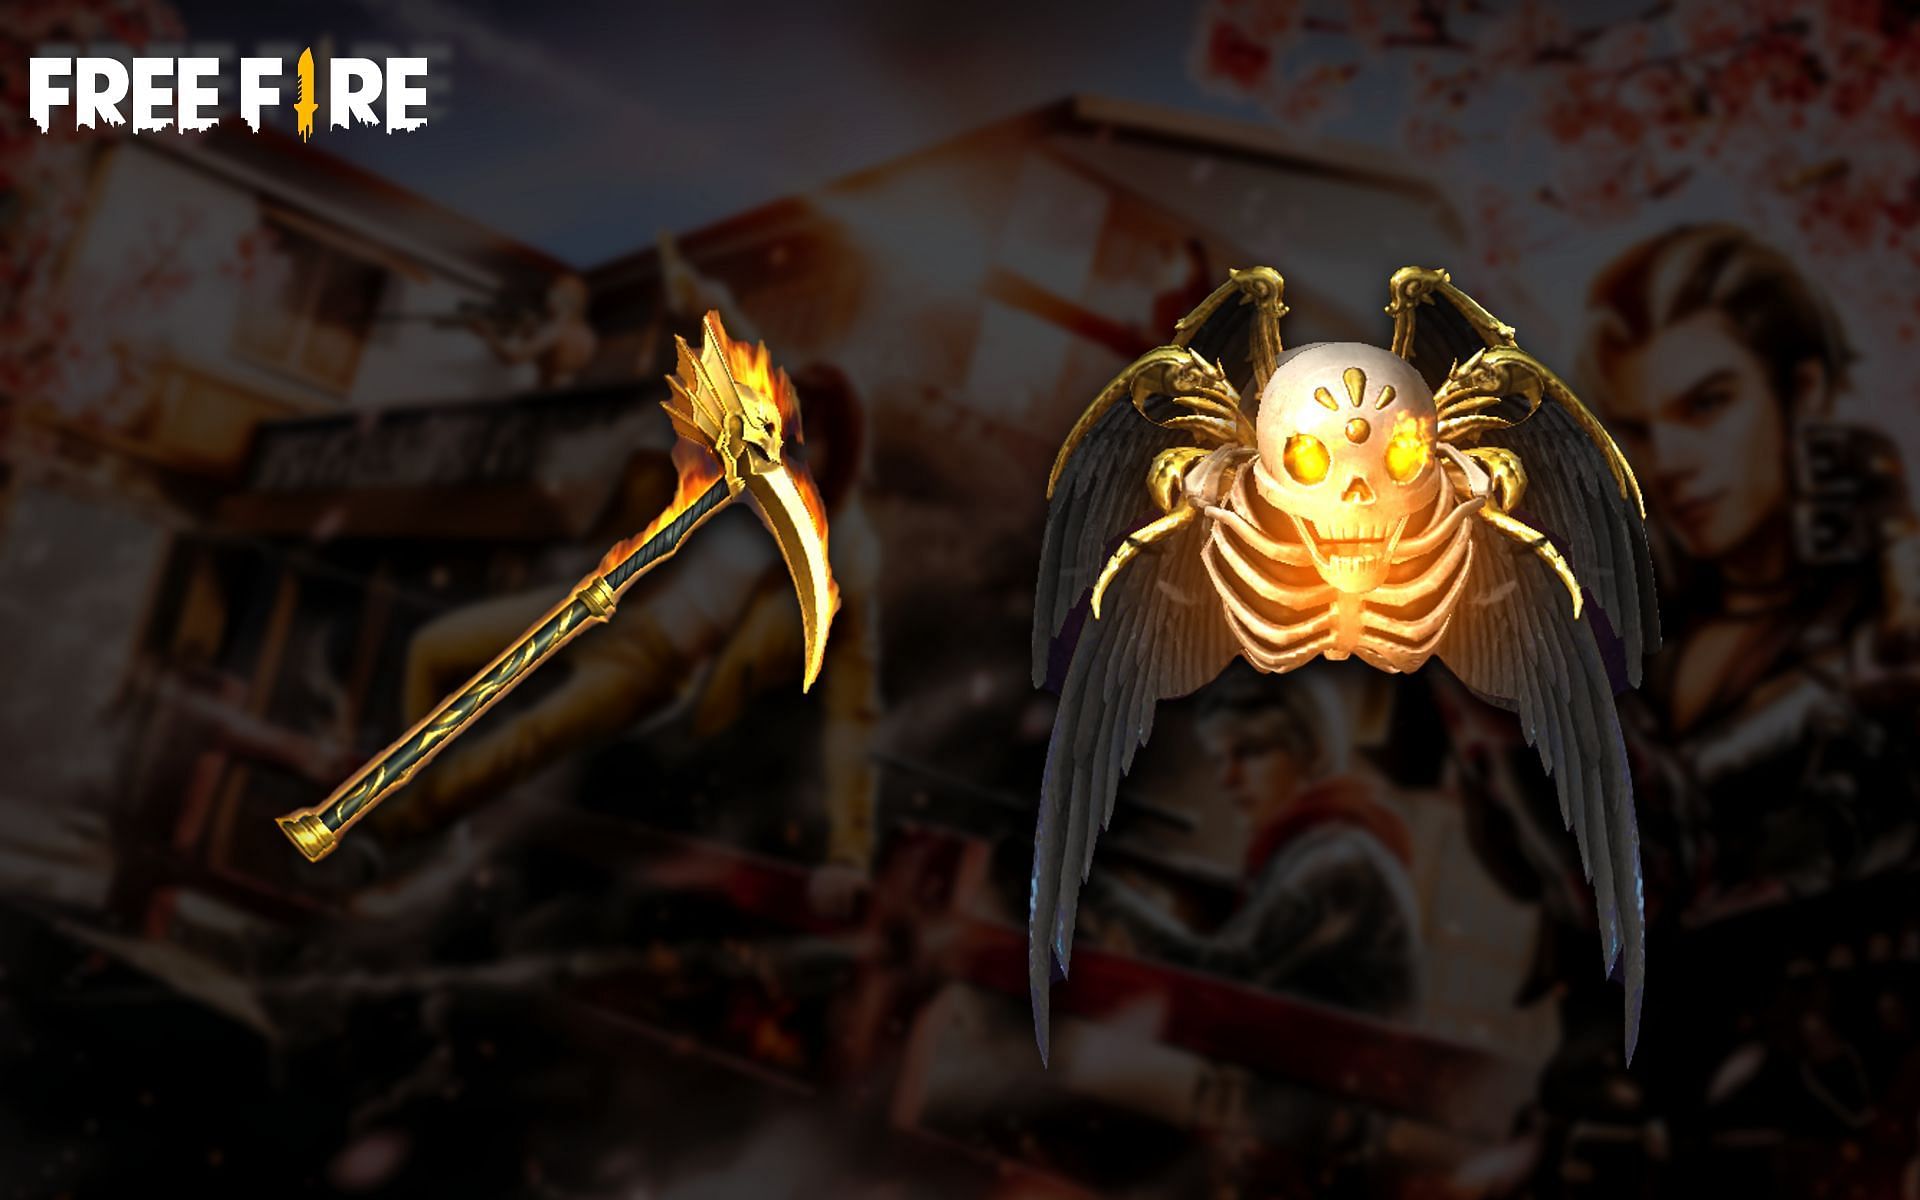 The two legendary rewards in the current event in Free Fire (Image via Sportskeeda)